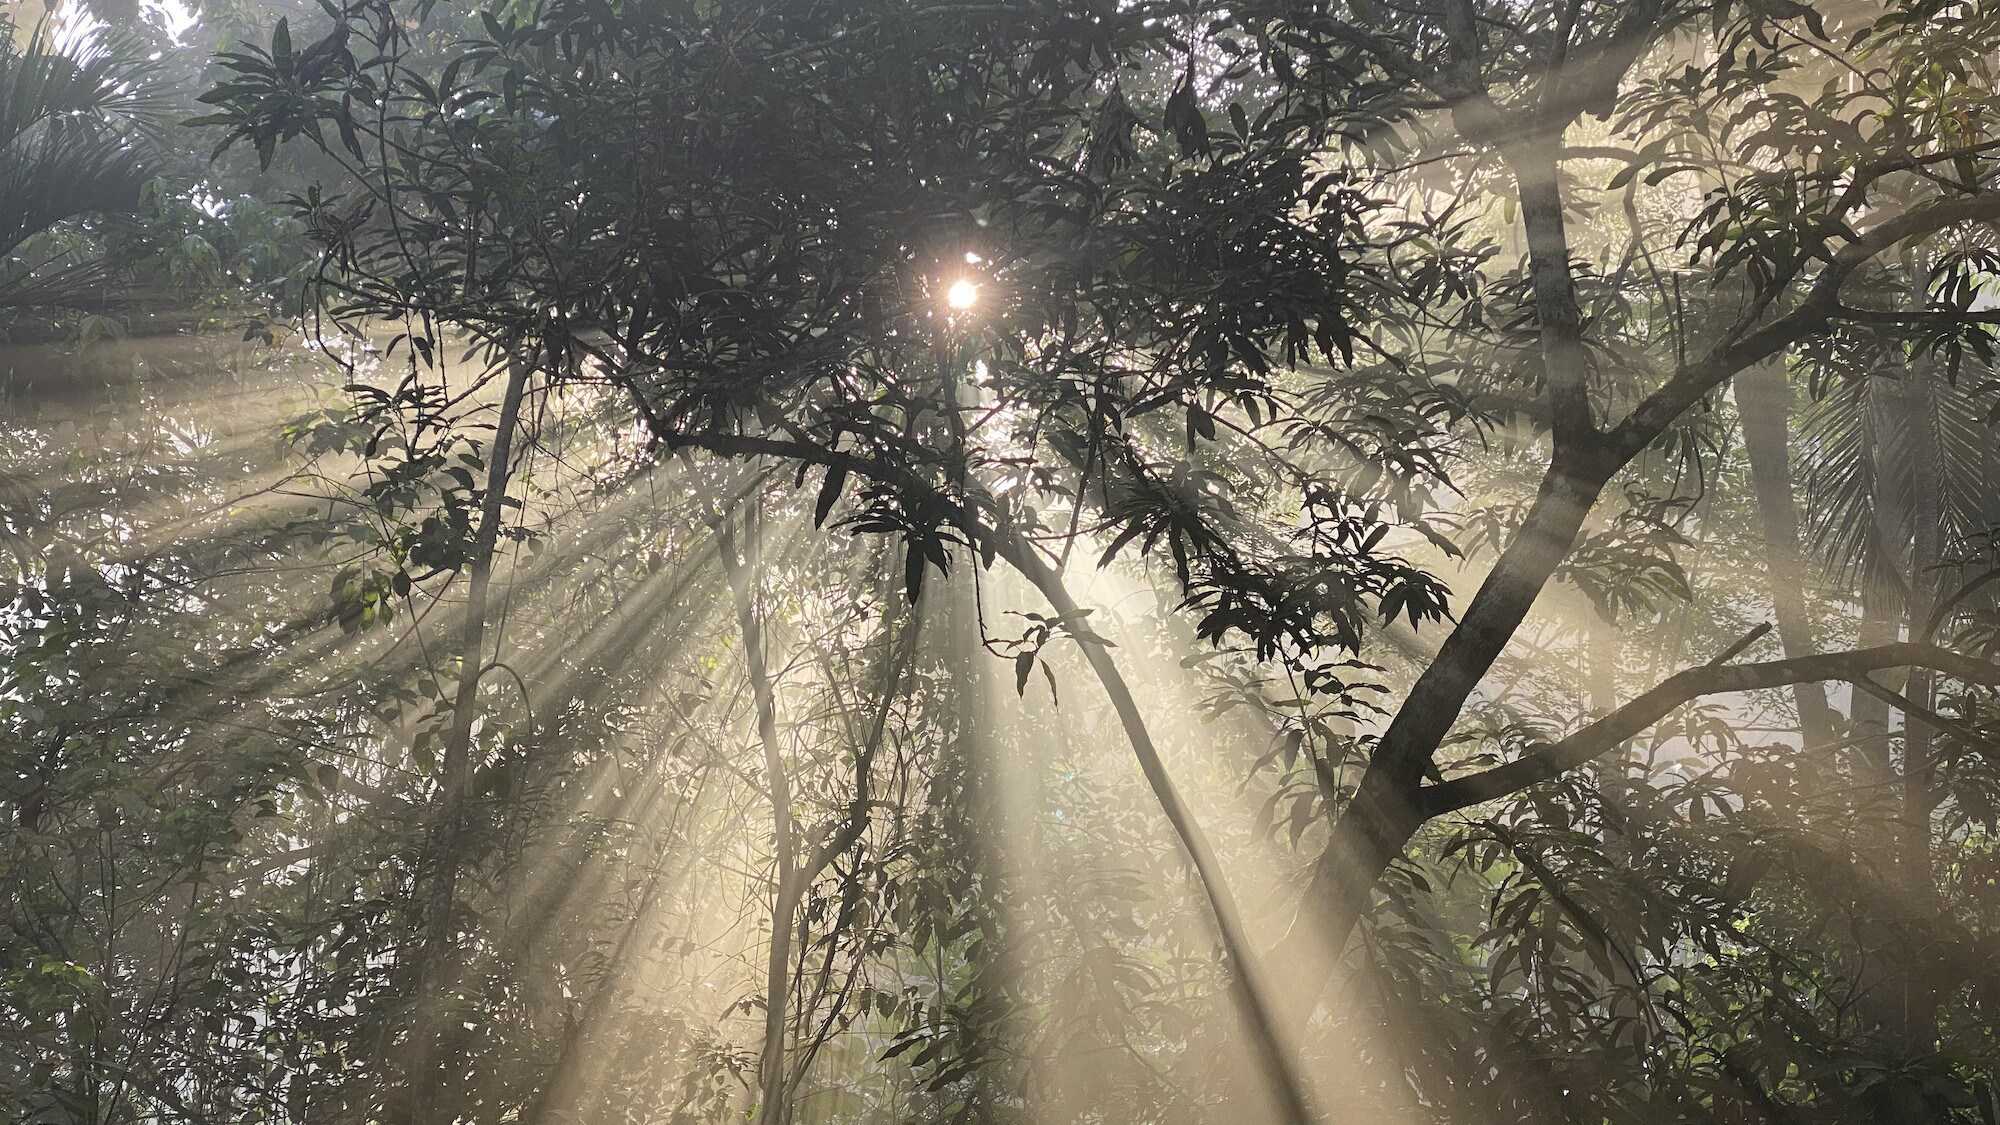 The morning sun shines through the rainforest during the "Welcome to the Jungle" episode of “A Real Bug’s Life.” (National Geographic/Katherine Hannaford)